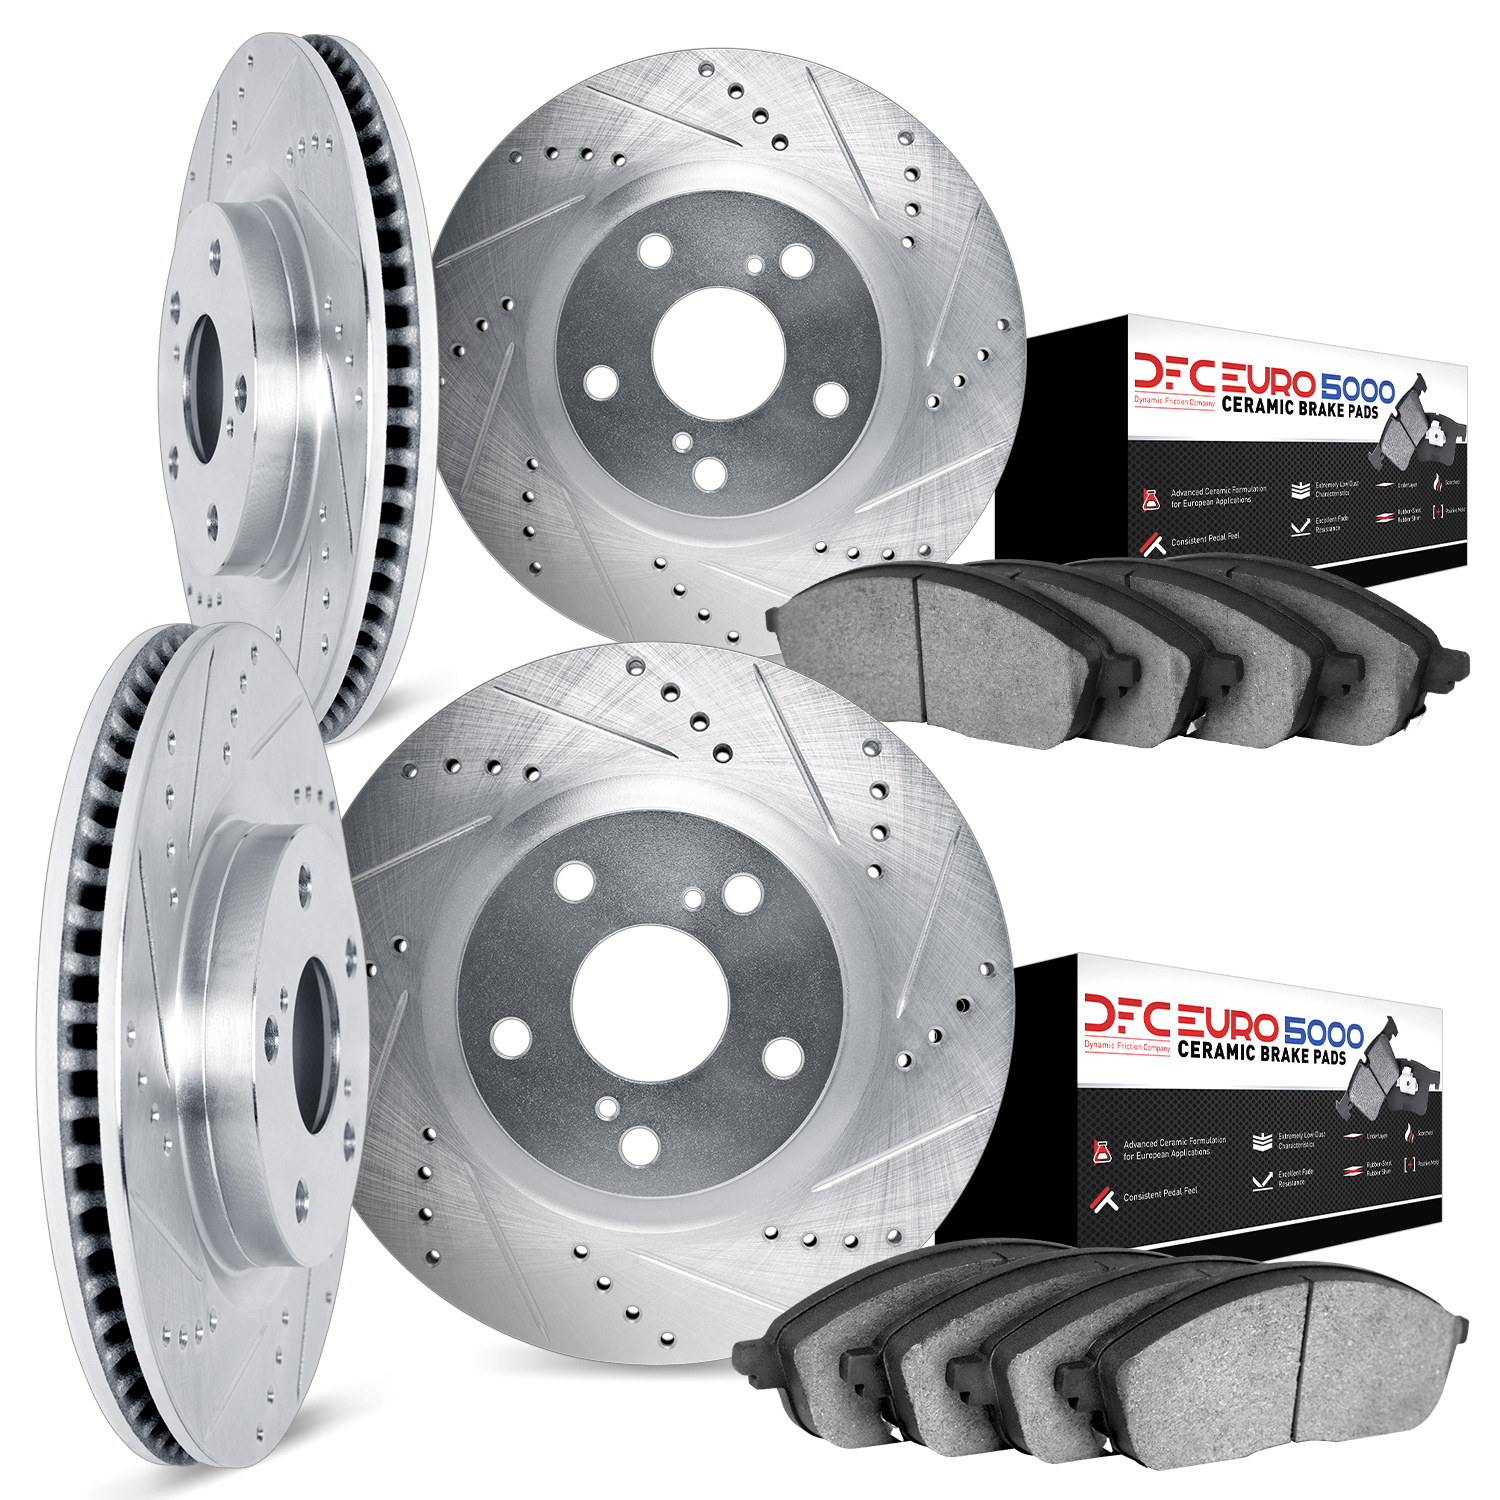 7604-31022 Drilled/Slotted Brake Rotors w/5000 Euro Ceramic Brake Pads Kit [Silver], 2007-2015 BMW, Position: Front and Rear